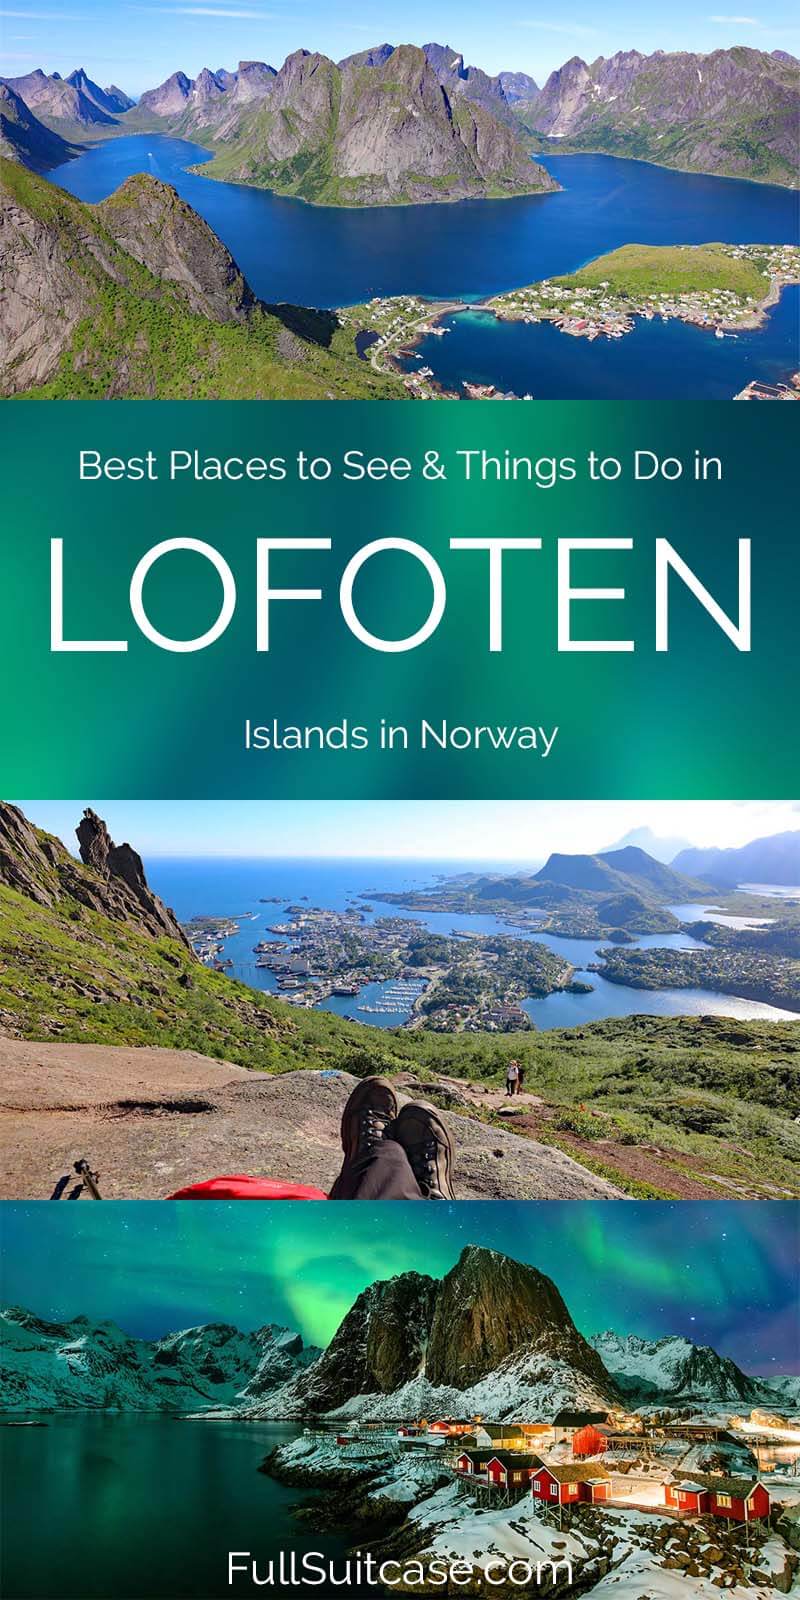 Best things to do and top places to see in Lofoten Islands, Norway